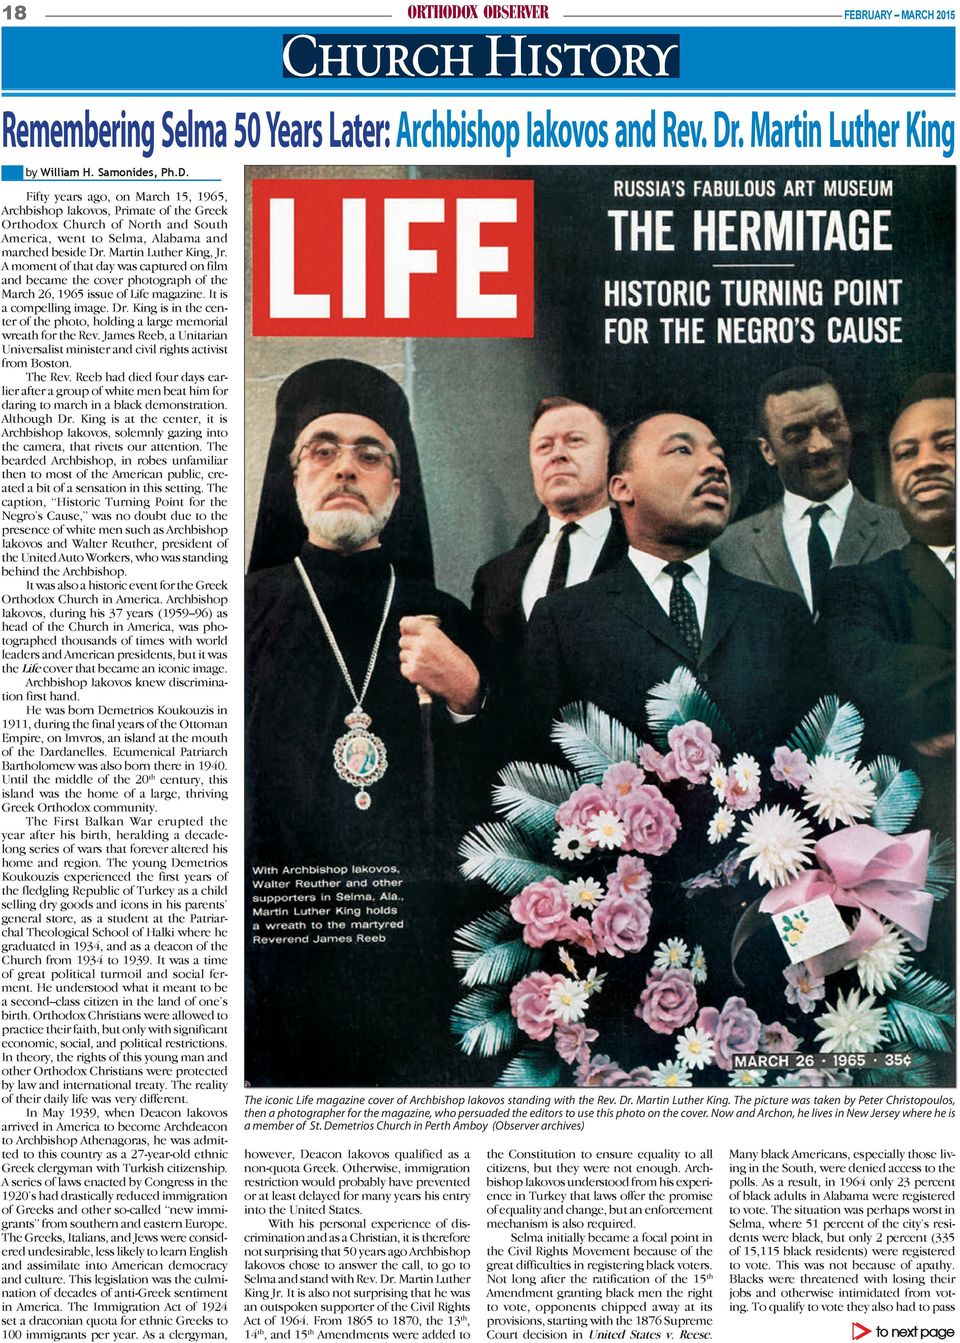 Fifty years ago, on March 15, 1965, Archbishop Iakovos, Primate of the Greek Orthodox Church of North and South America, went to Selma, Alabama and marched beside Dr. Martin Luther King, Jr.